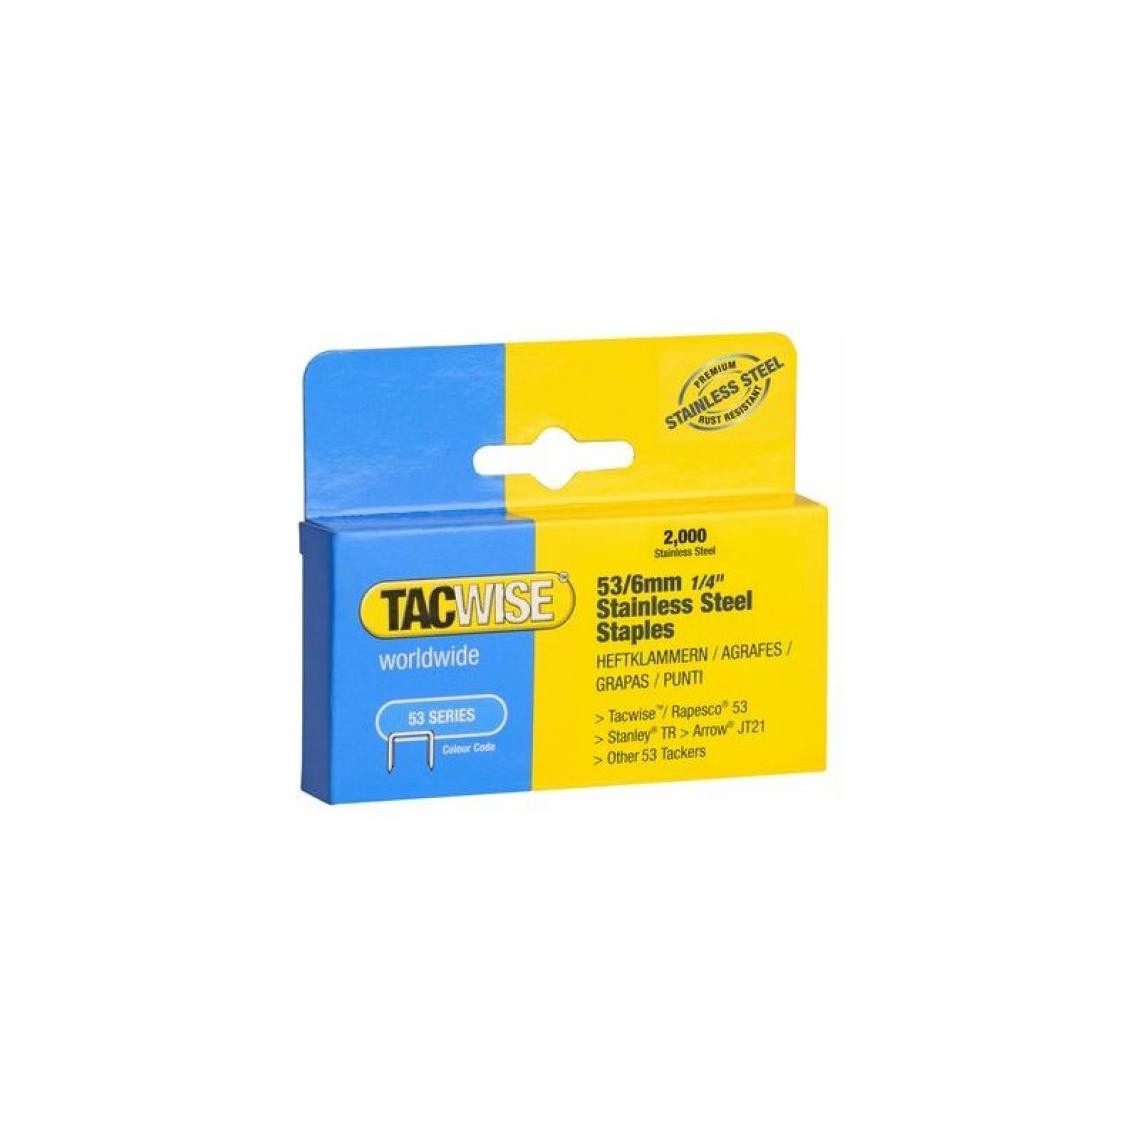 Tacwise - TACWISE Agrafes 53/6 mm, acier inoxydable, 2.000 pièces () - Boulonnerie